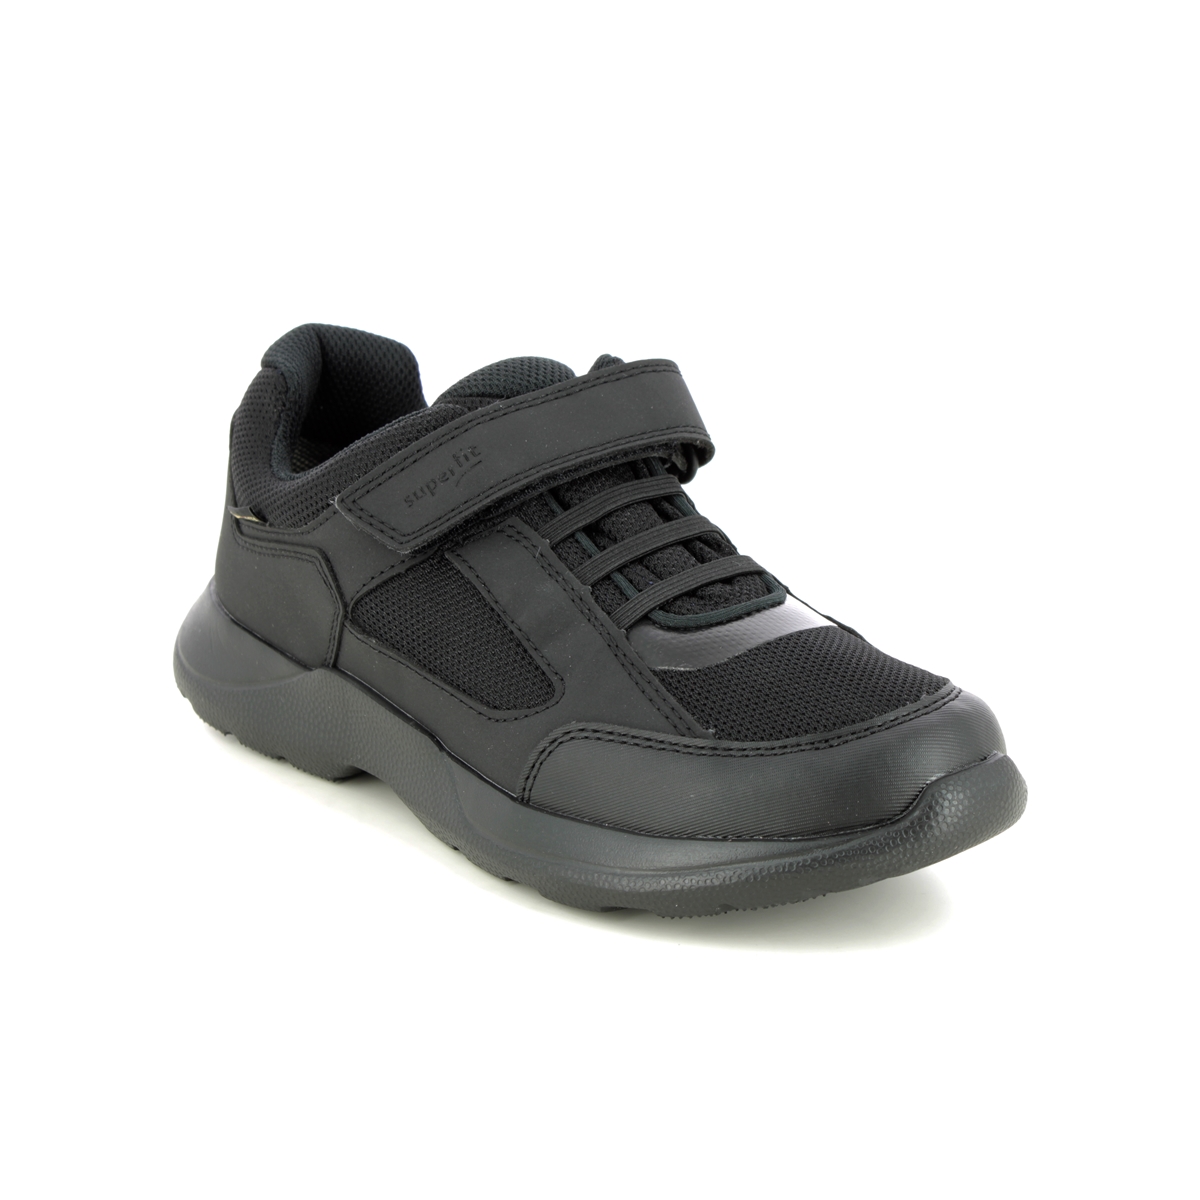 Superfit Rush Gtx Bungee Black Kids Trainers 1006223-0000 In Size 38 In Plain Black For kids